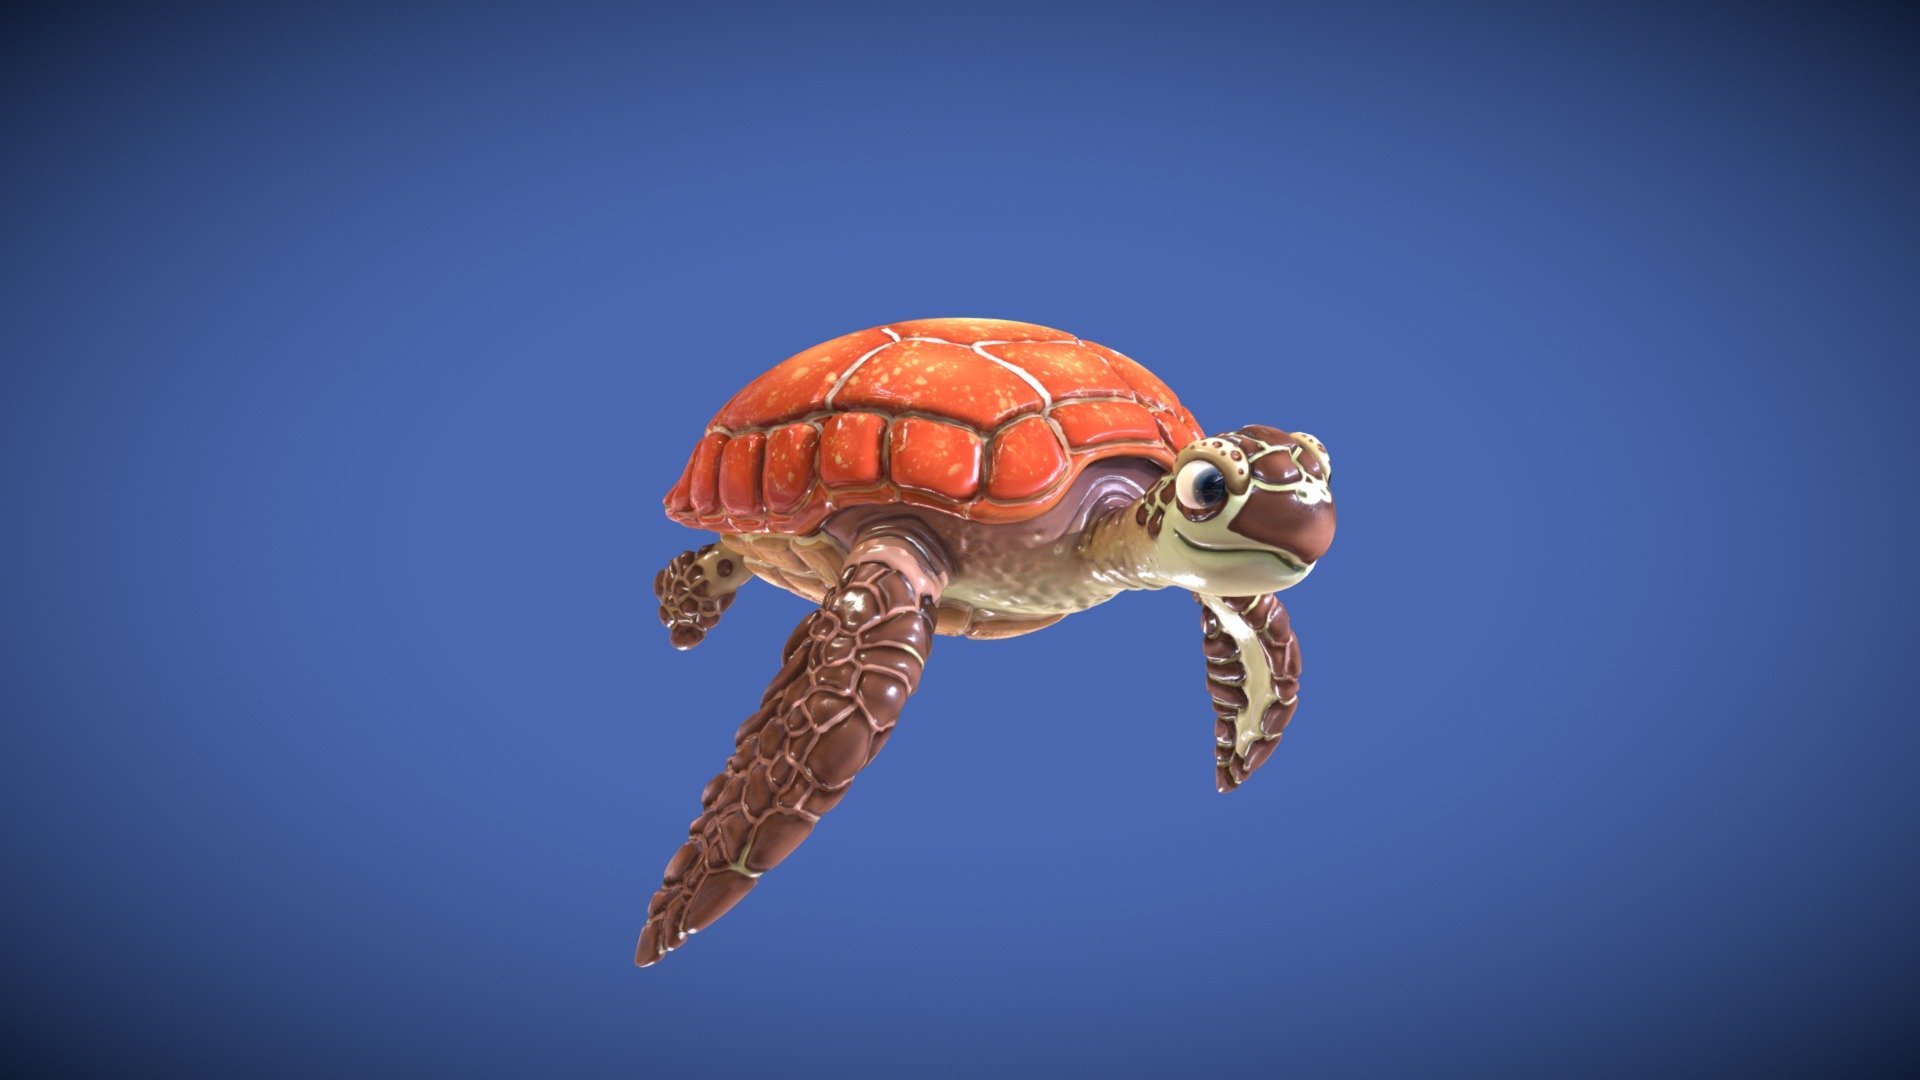 I sculpted this turtle using ZBrush and then hand painted the model using 3D Coat and Krita 3d model